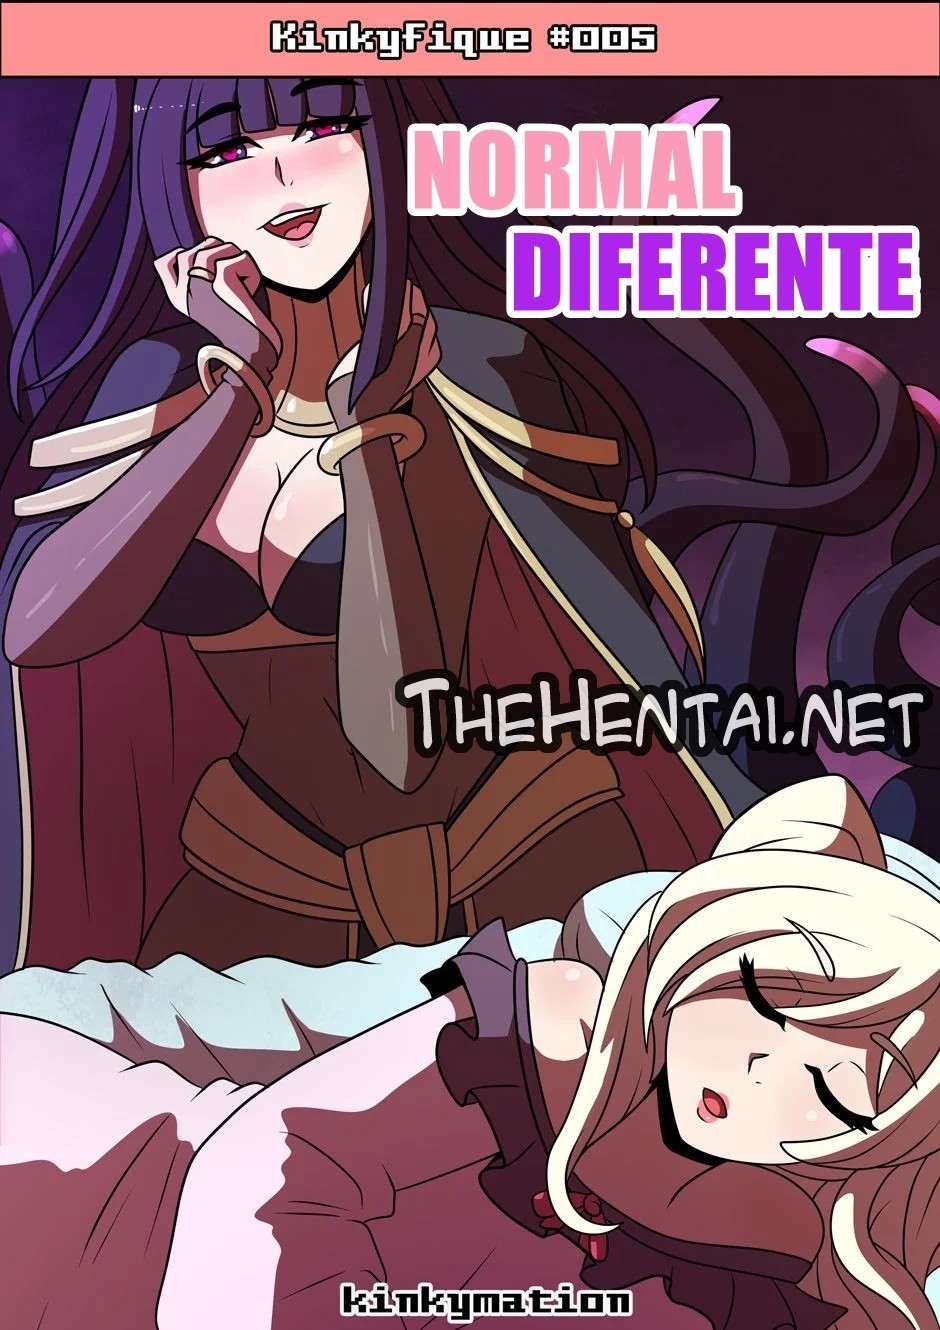 Different Normal  Hentai pt-br 01